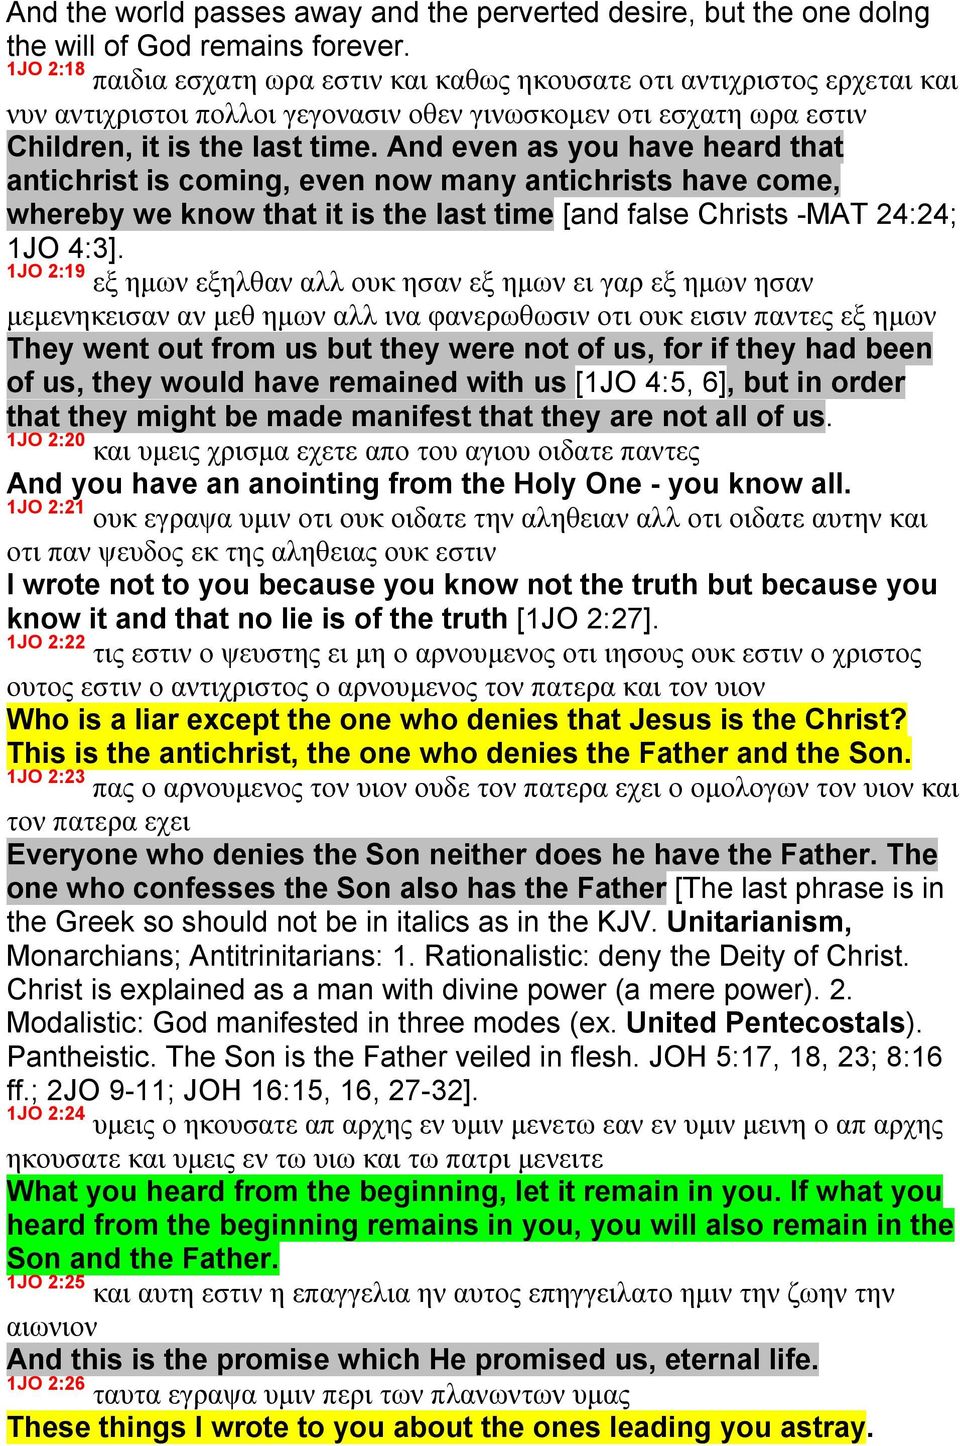 And even as you have heard that antichrist is coming, even now many antichrists have come, whereby we know that it is the last time [and false Christs -MAT 24:24; 1JO 4:3].